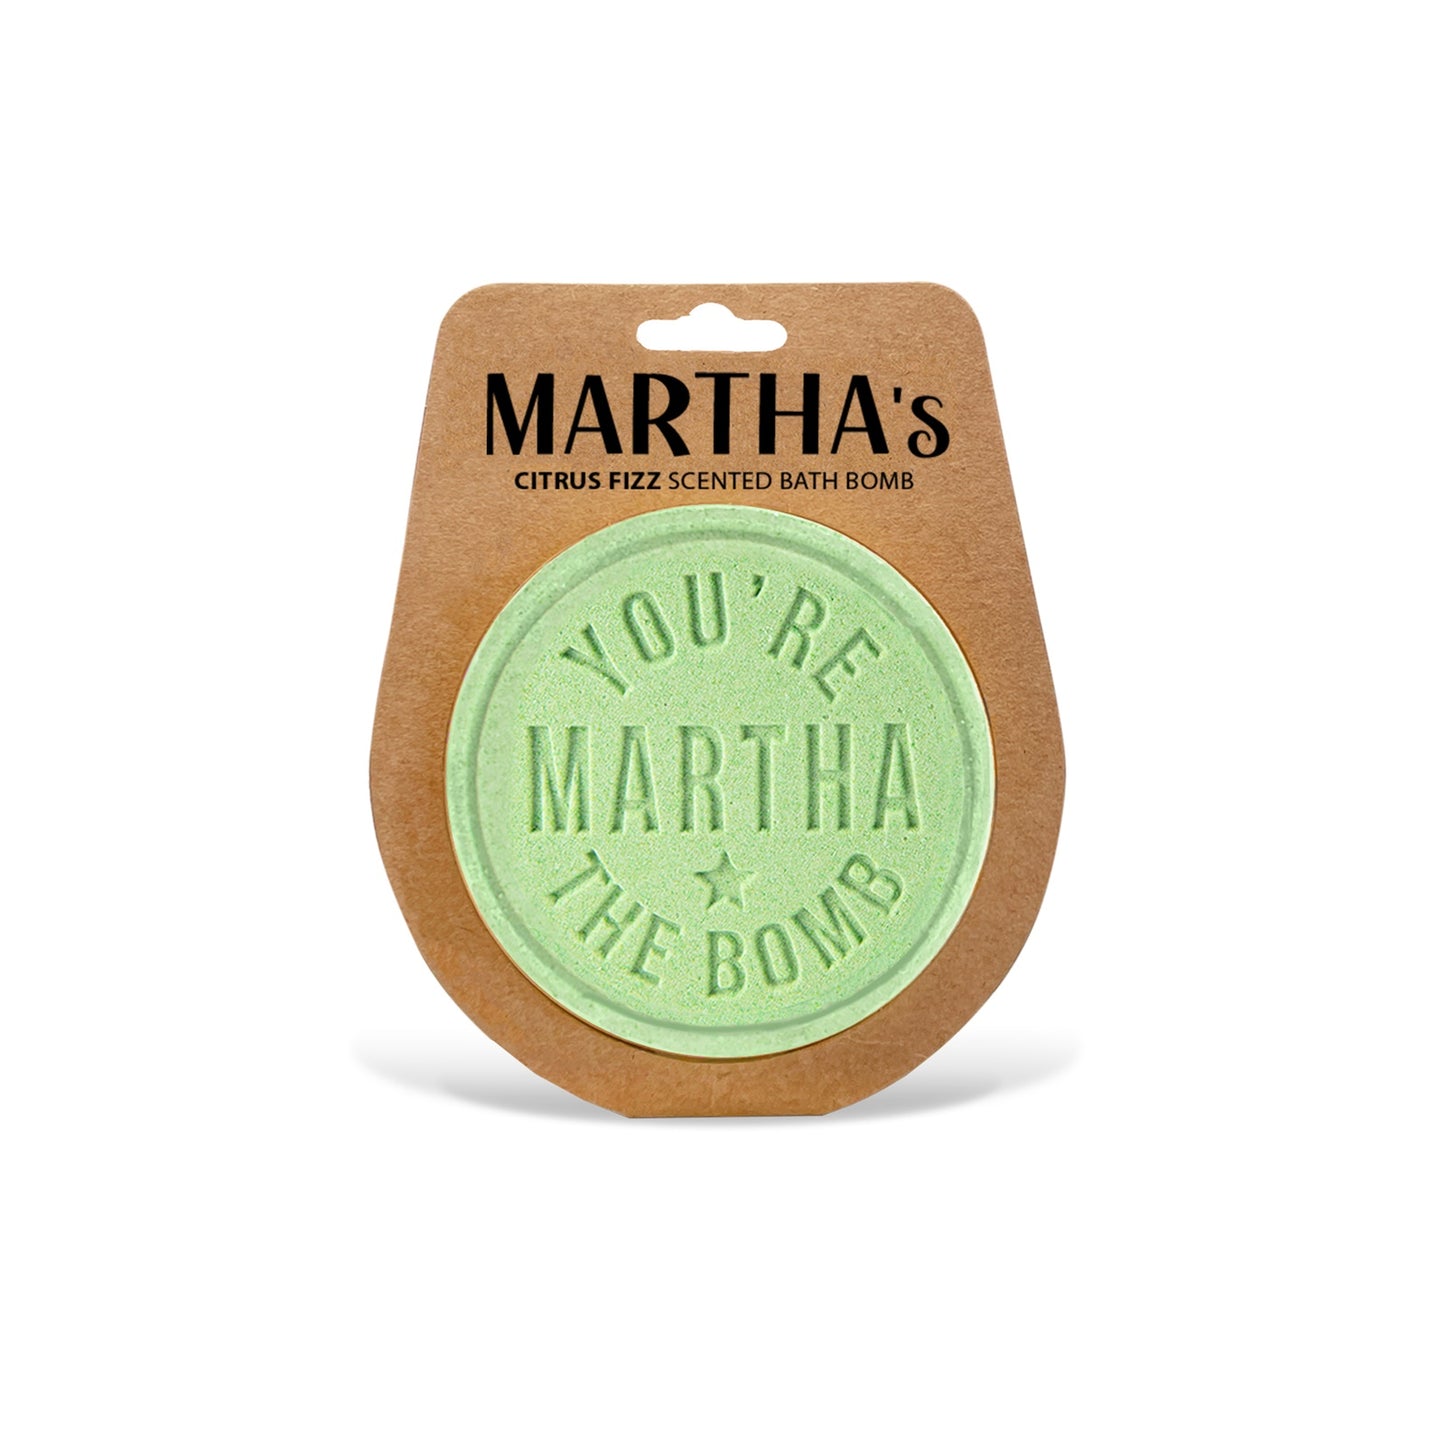 H&H Personalised Scented Bath Bombs - Martha